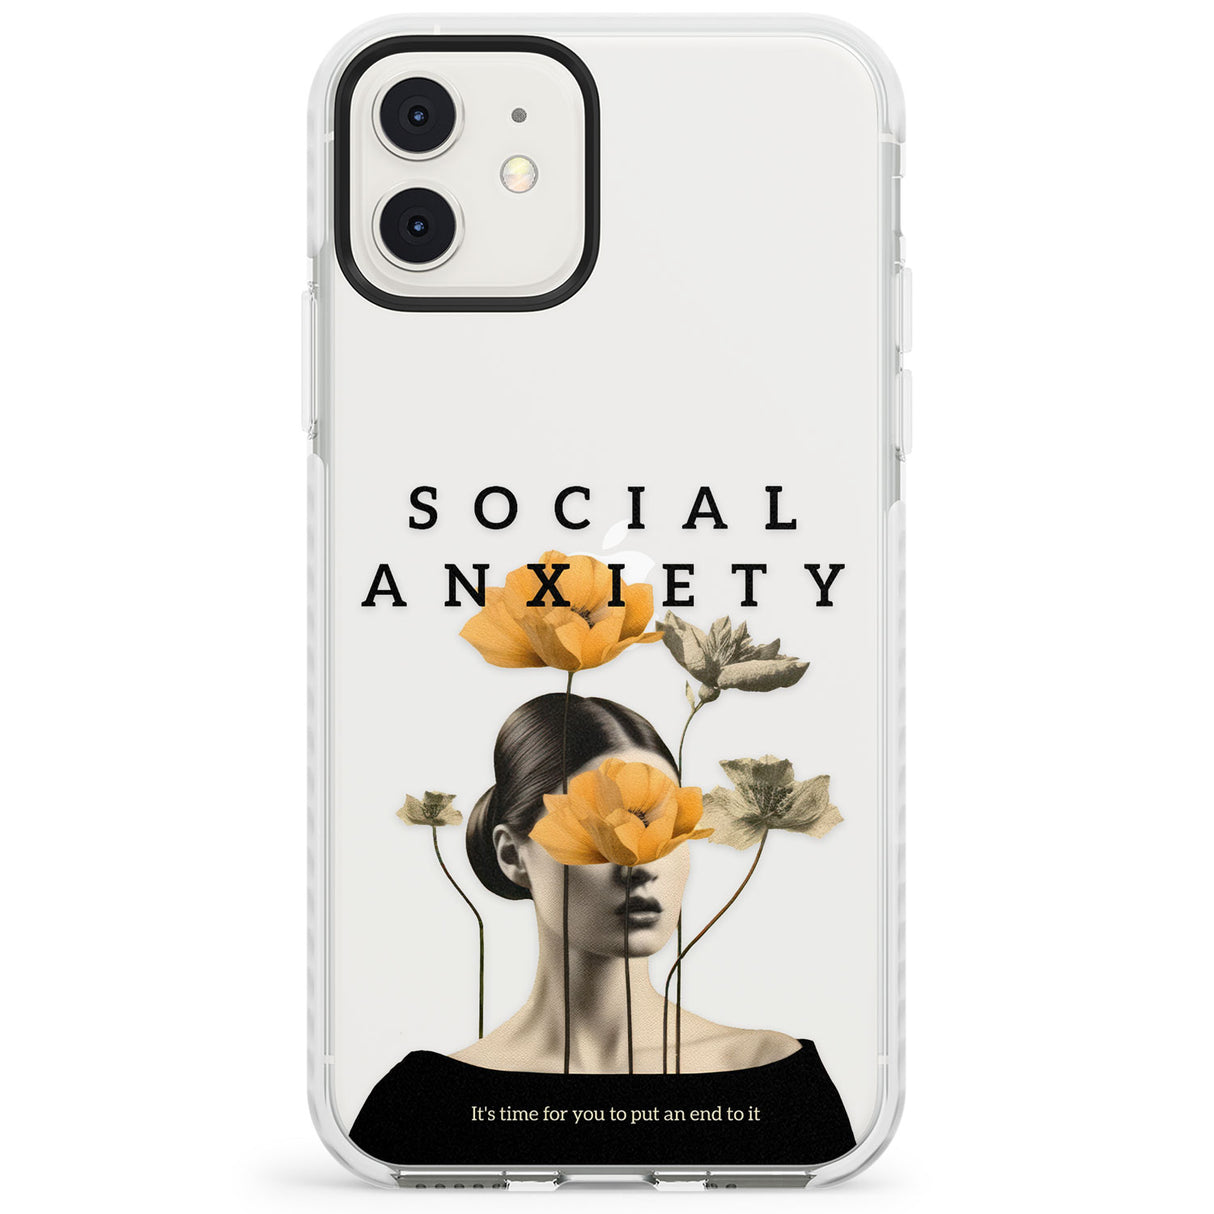 Social Anxiety Impact Phone Case for iPhone 11, iphone 12